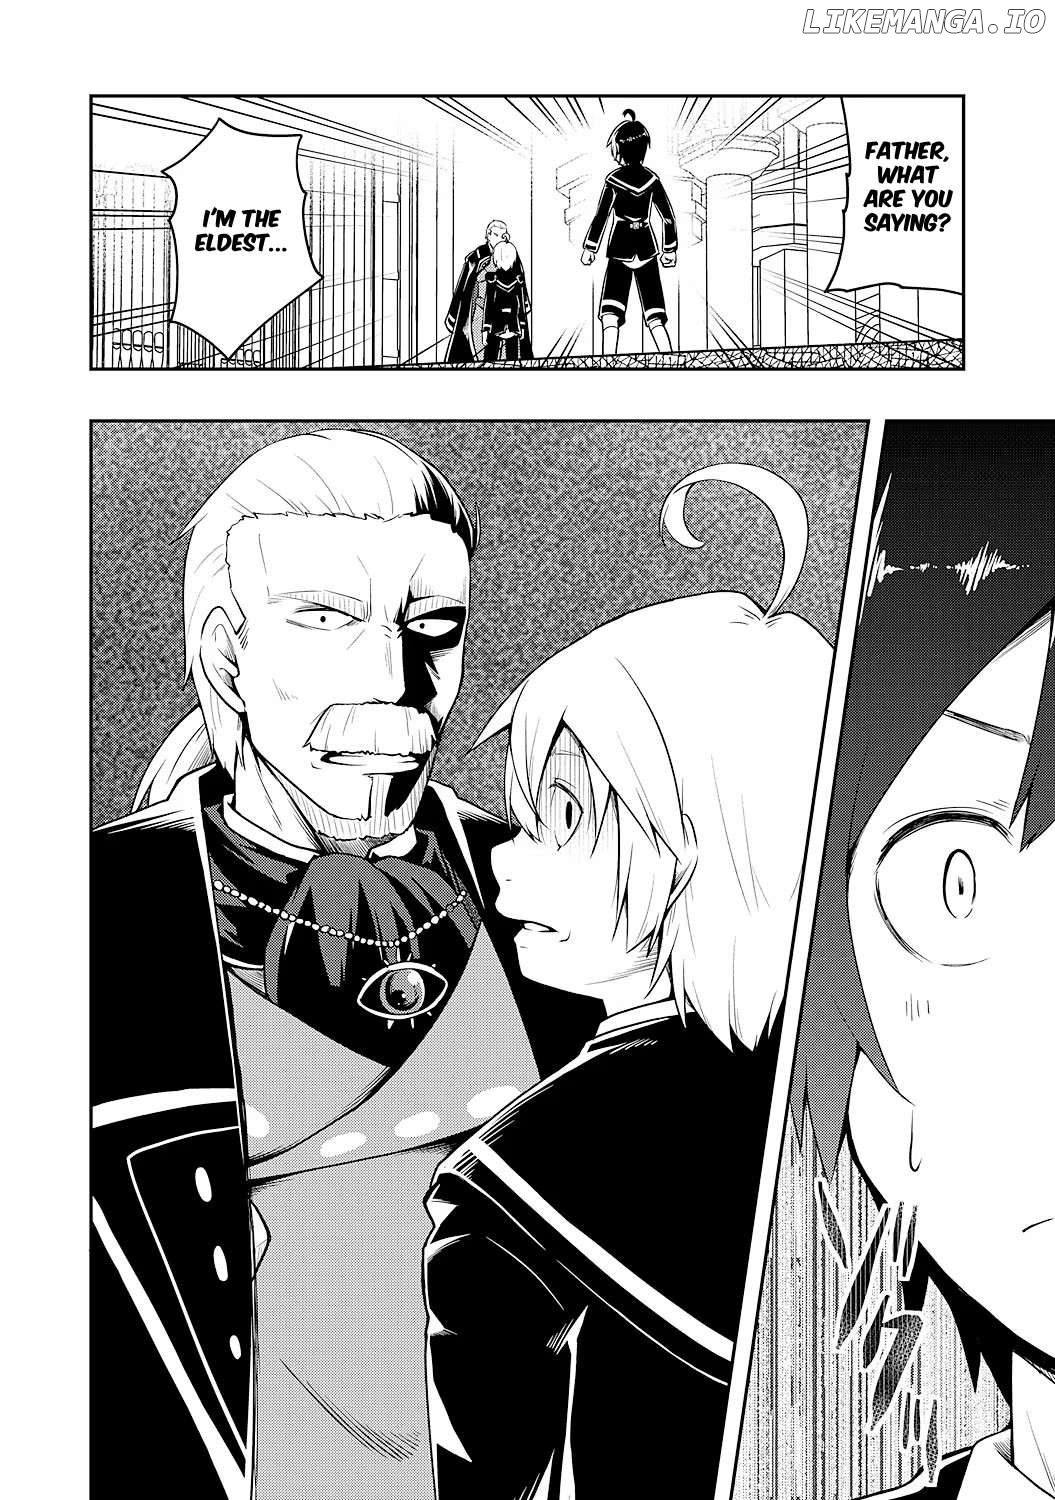 The Reincarnated Noble Who Was Exiled, Uses a Useless Skill to Rule Over Domestic Affairs~ Was Supposed to Run the Territory Freely, but Thanks to the Skill "Gacha", Ended Up Creating the Strongest Territory~ Chapter 1 - page 37